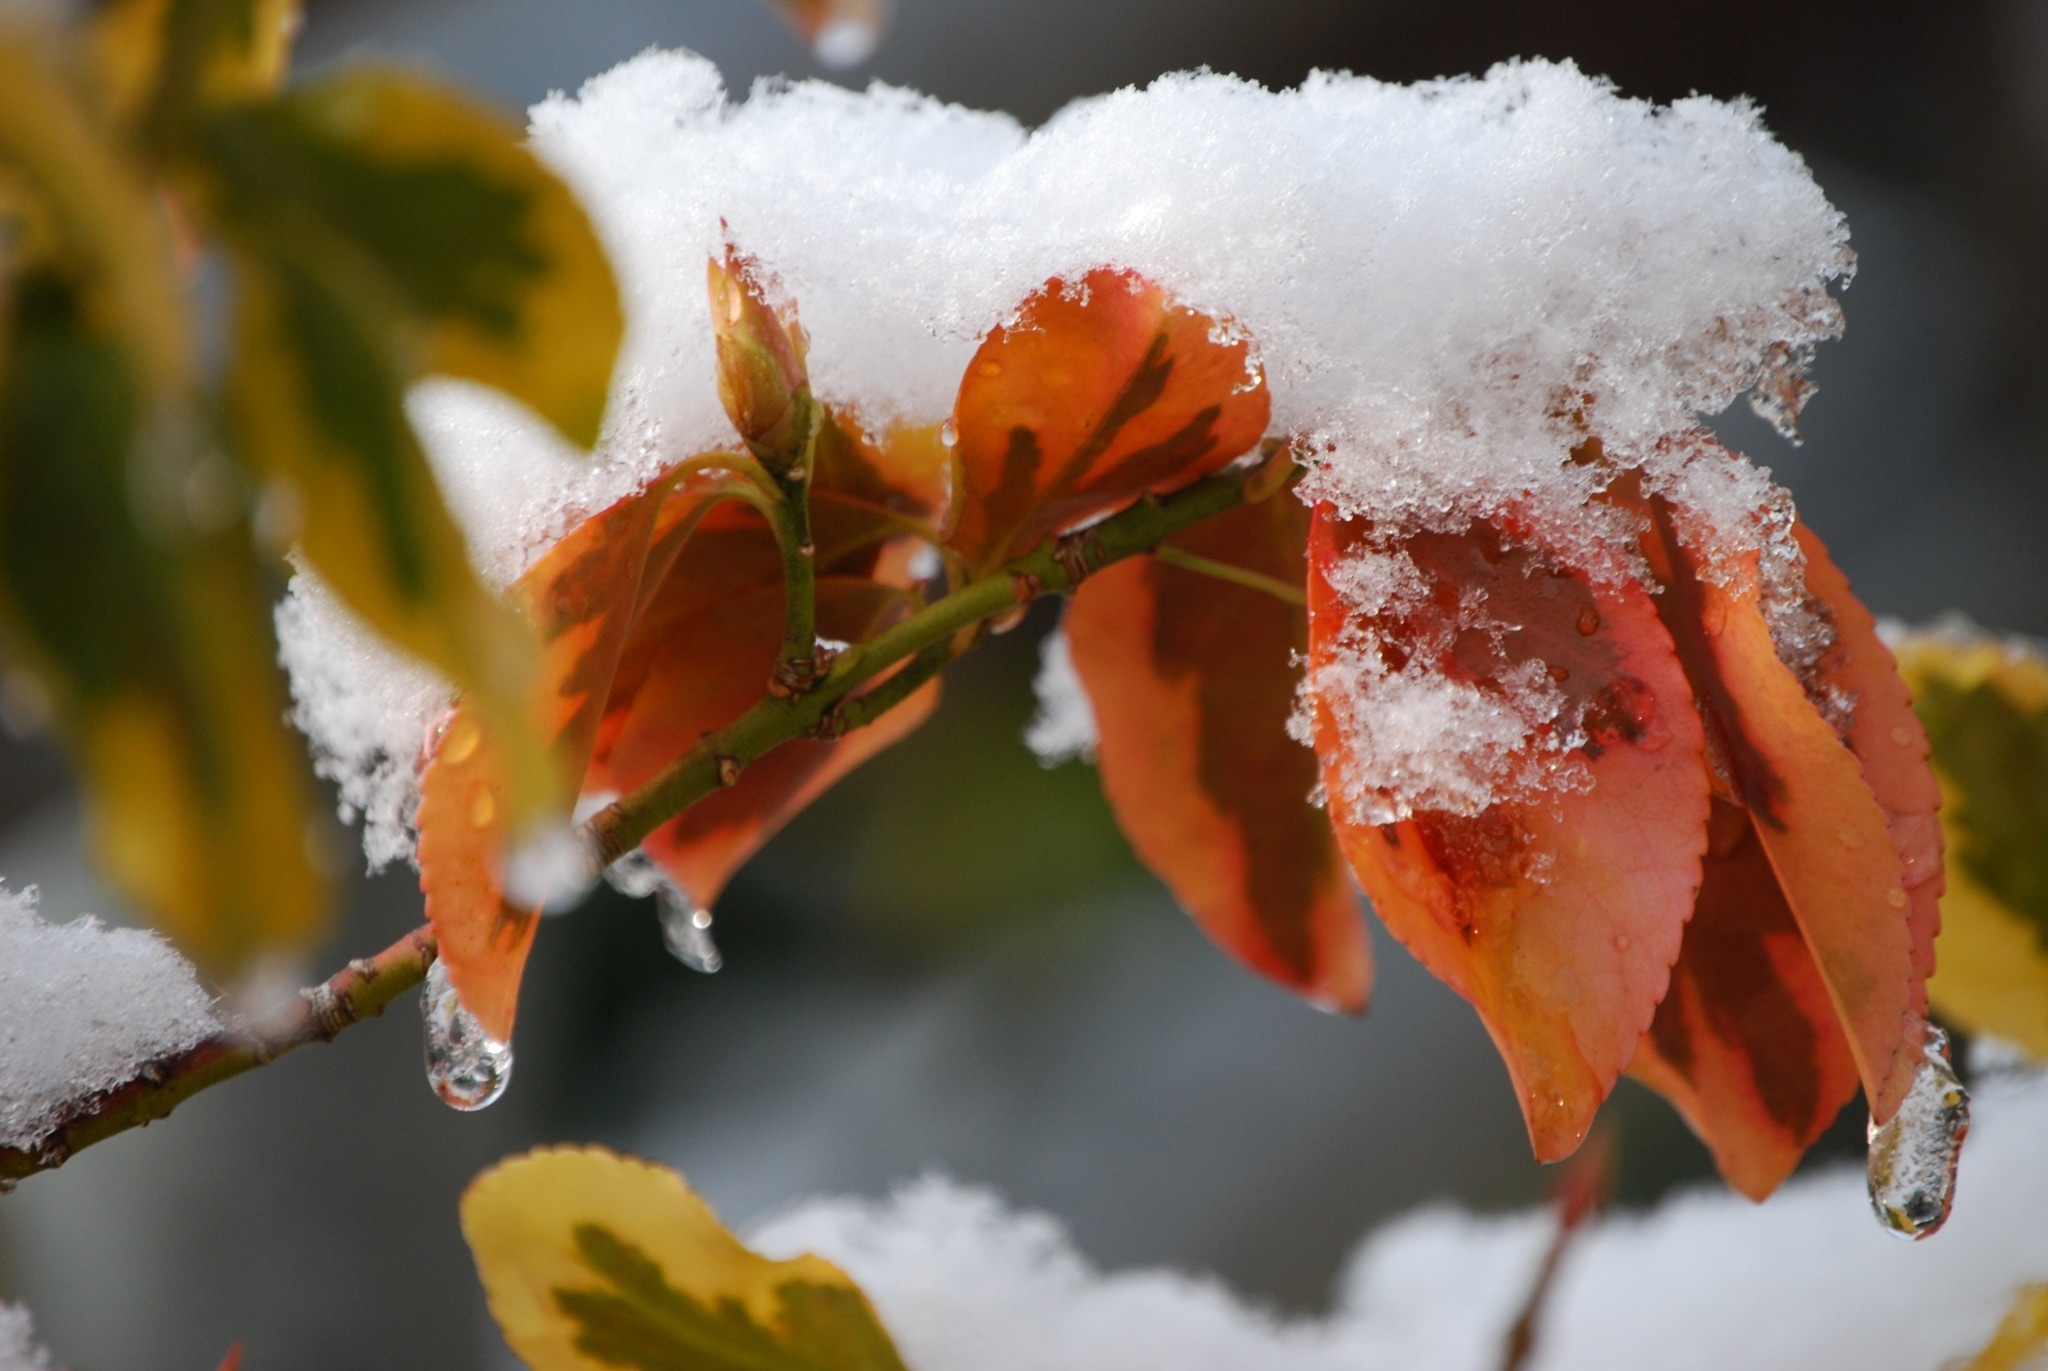 Winter, Snow, Snowy, Leaves, cold temperature, winter